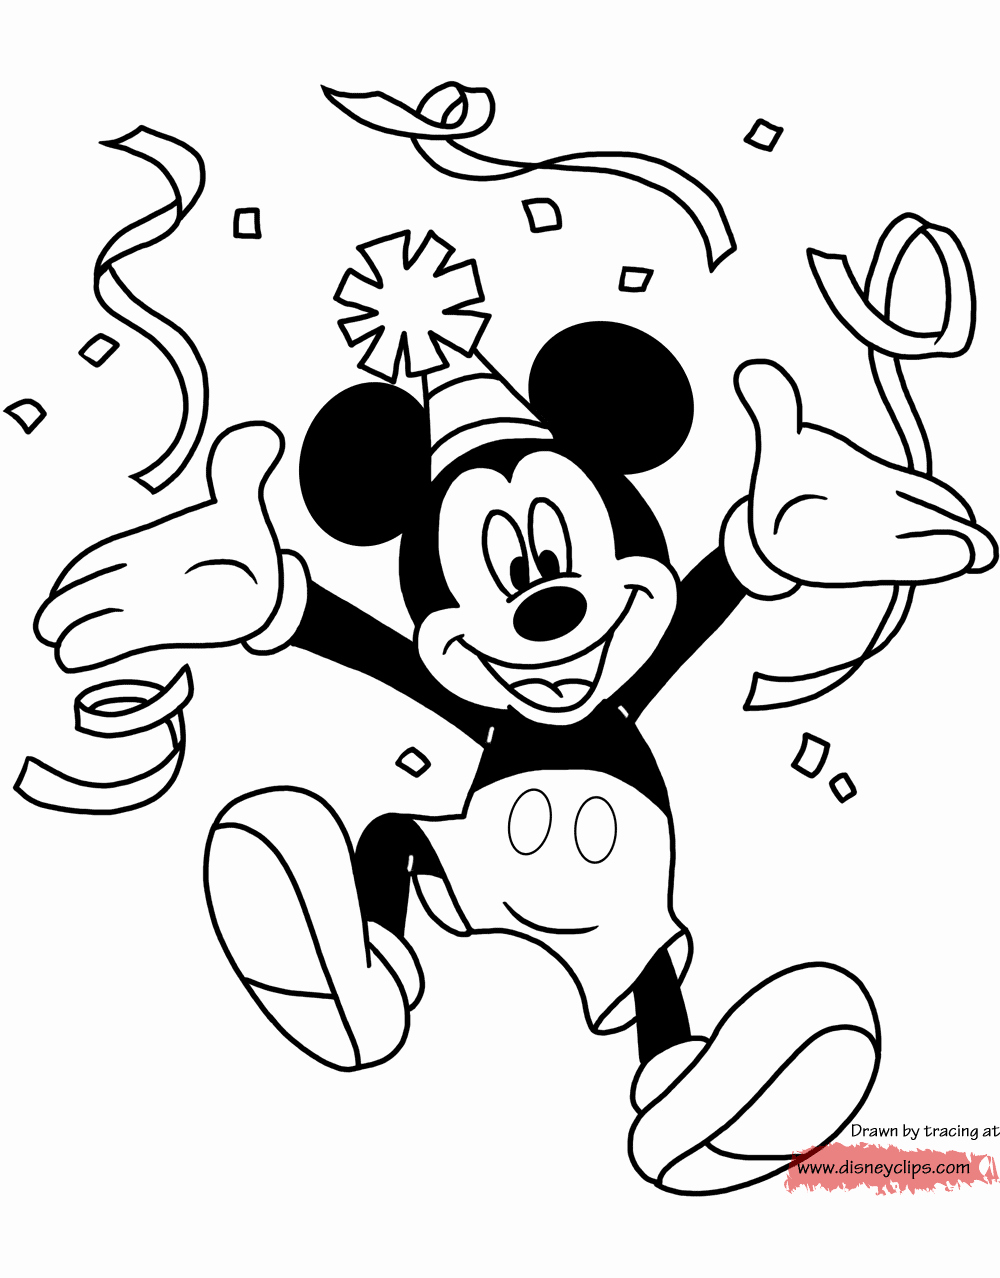 Mickey Mouse Colouring Sheets Luxury Disney Mickey Mouse Printable Coloring Pages